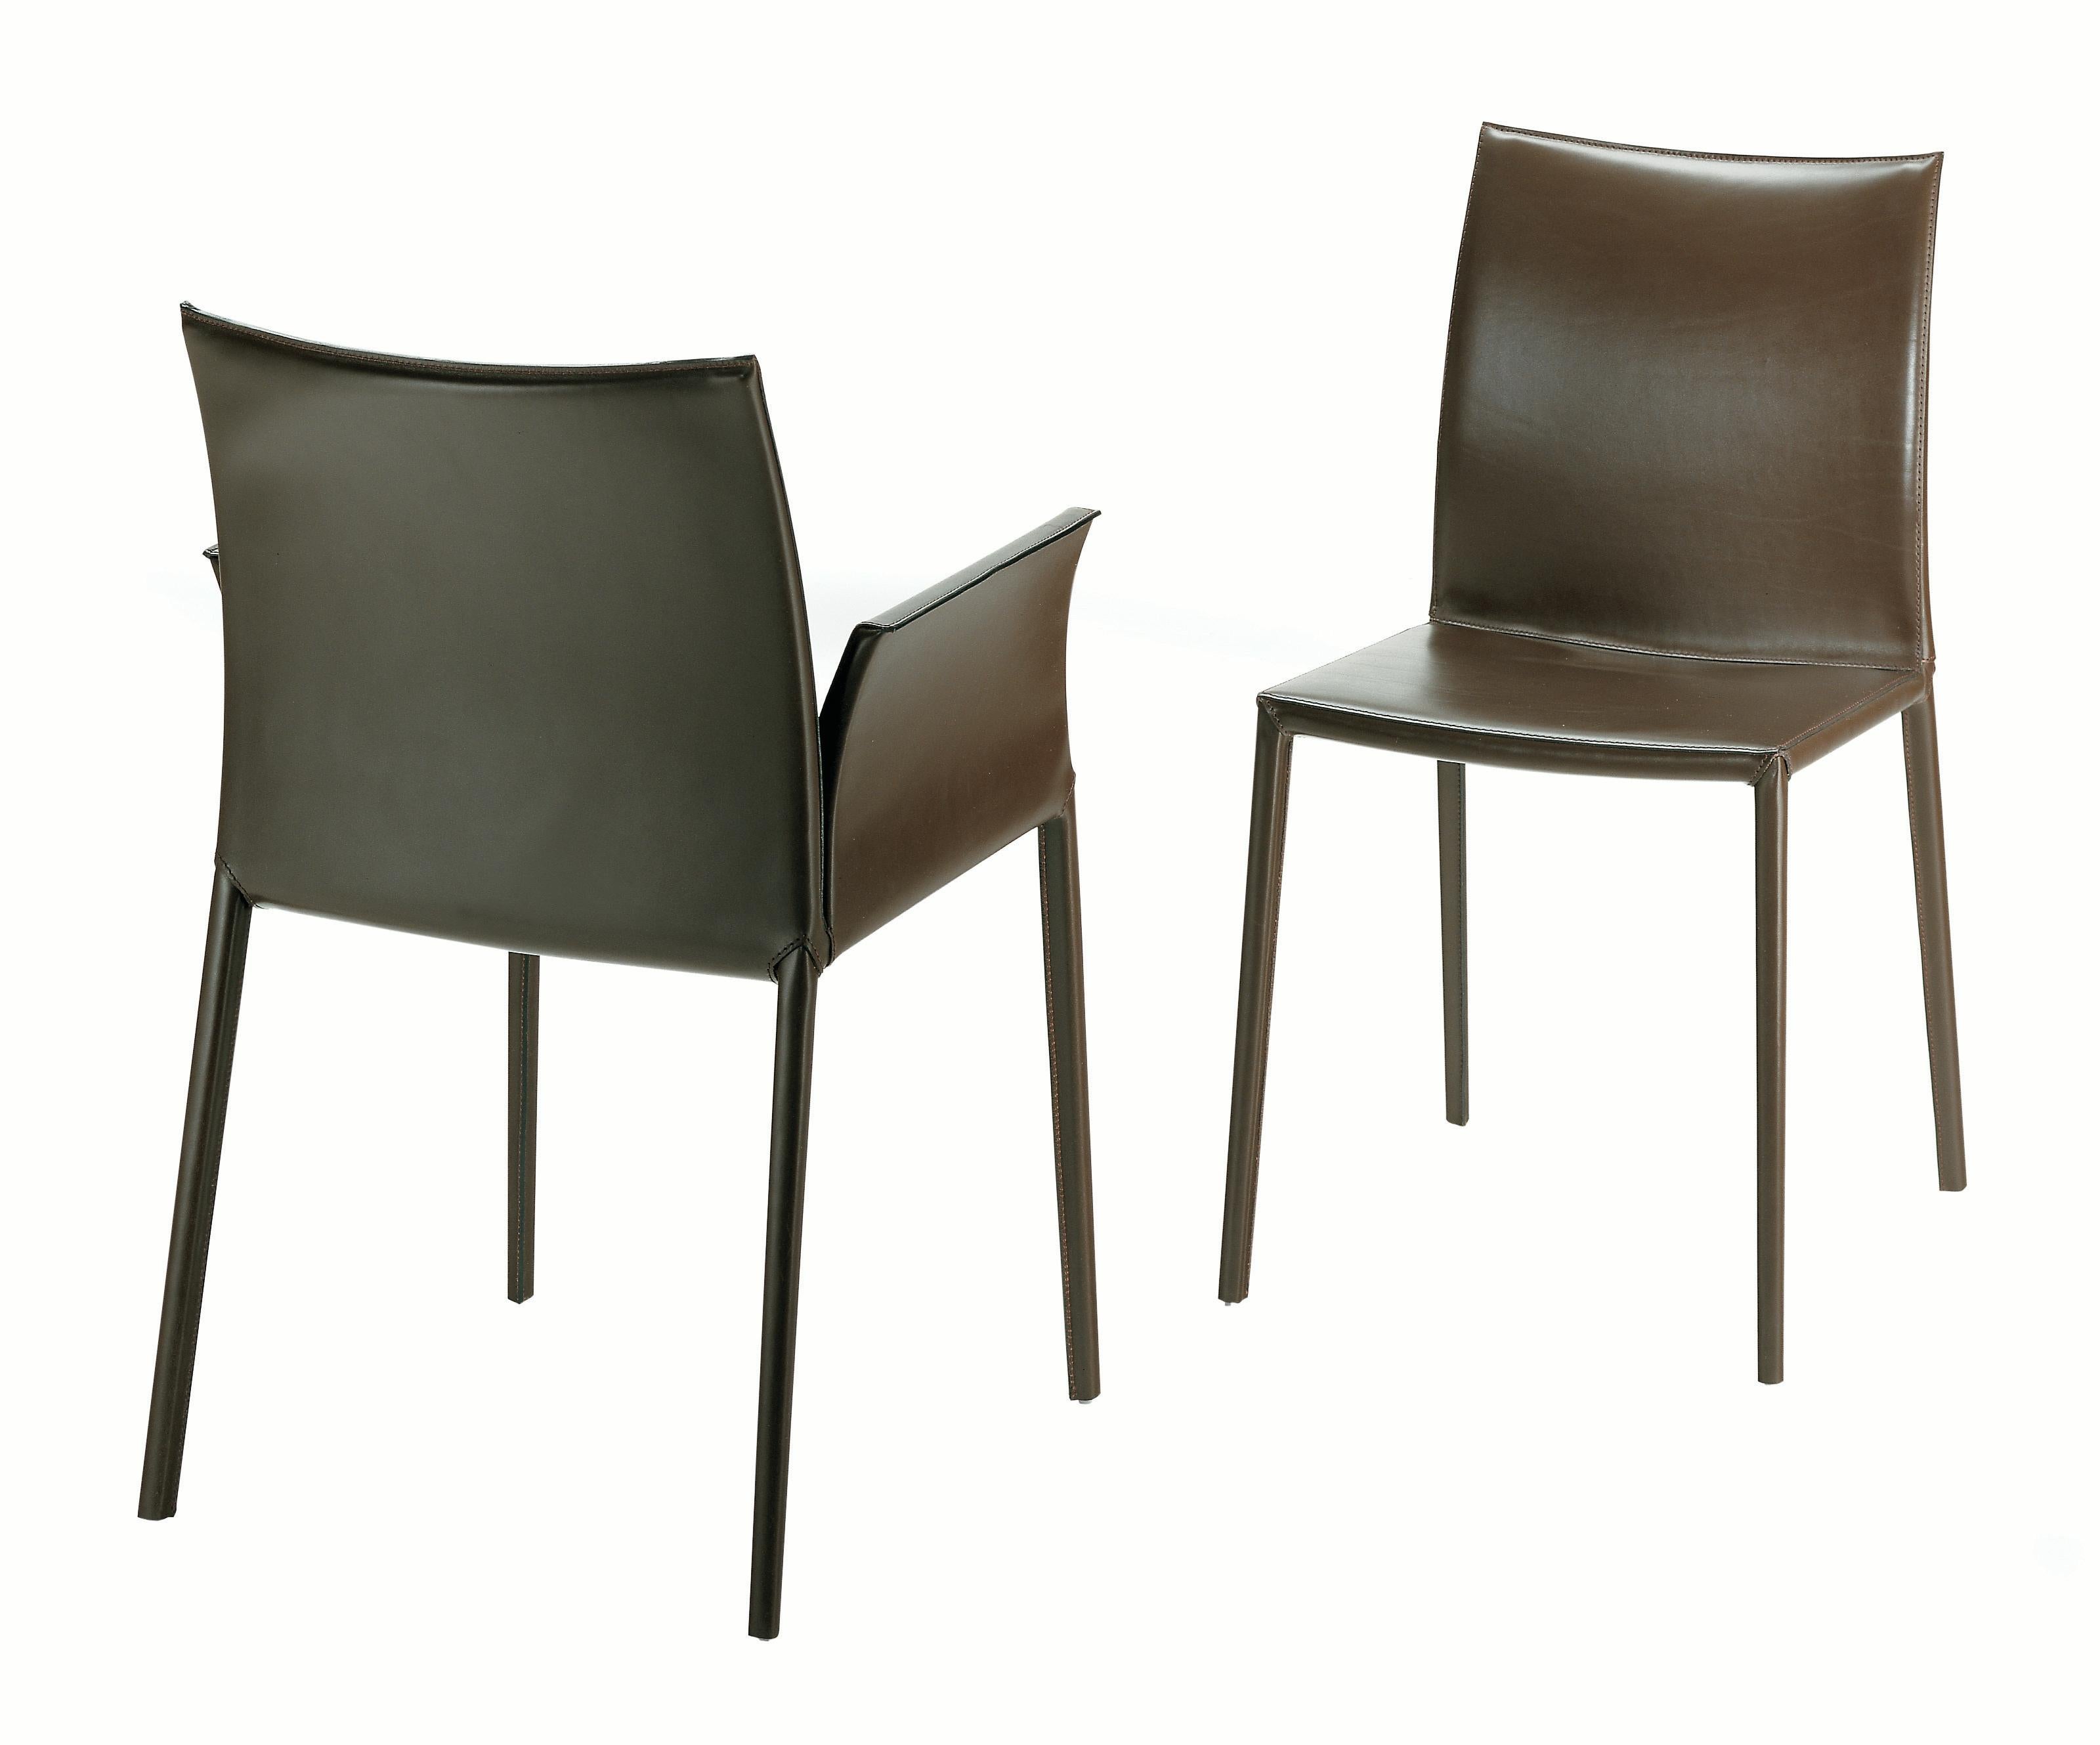 Italian Zanotta Small Lea Chair in Light Brown Cowhide Seat & Legs with Aluminium Frame For Sale